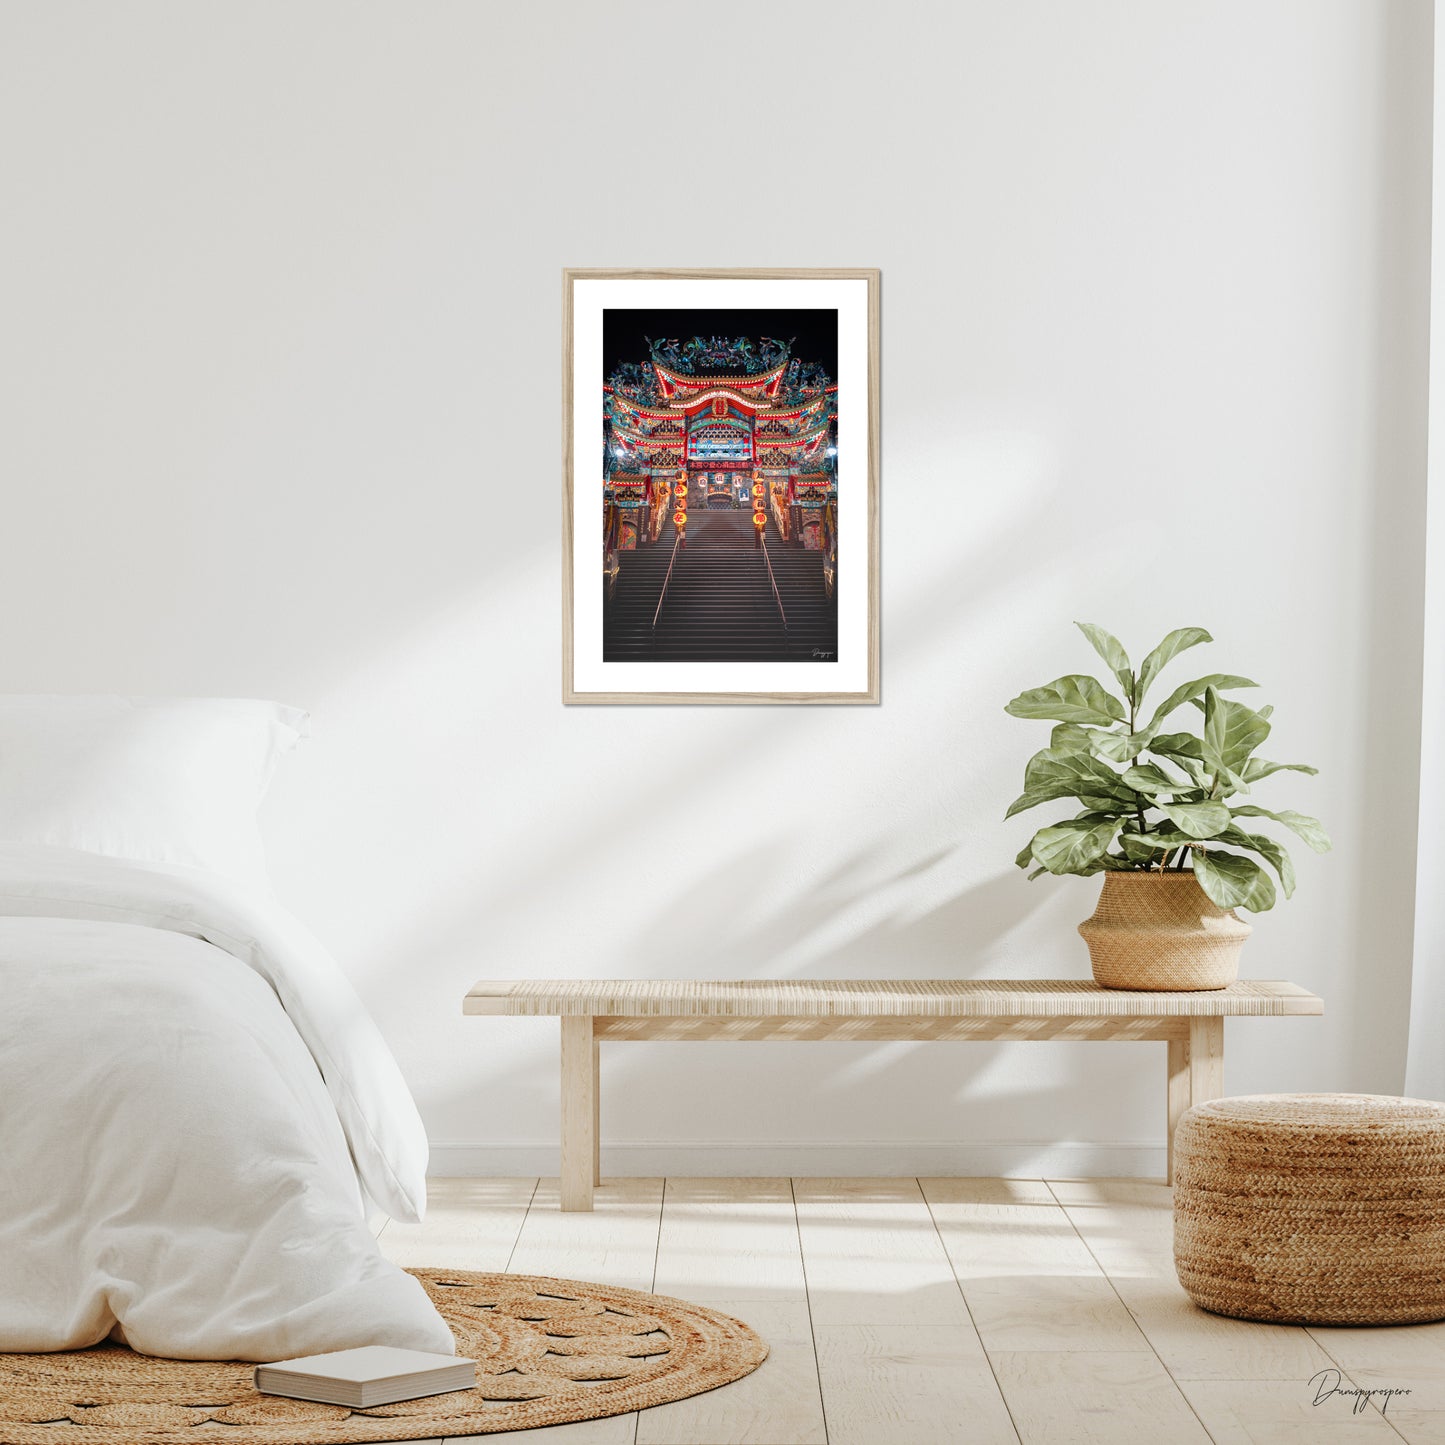 Mockup of wall art showing a big beige wooden frame that is hanging on the wall of a bedroom and contains a photo of a very impressive Taoist temple during the night in Taipei Taiwan